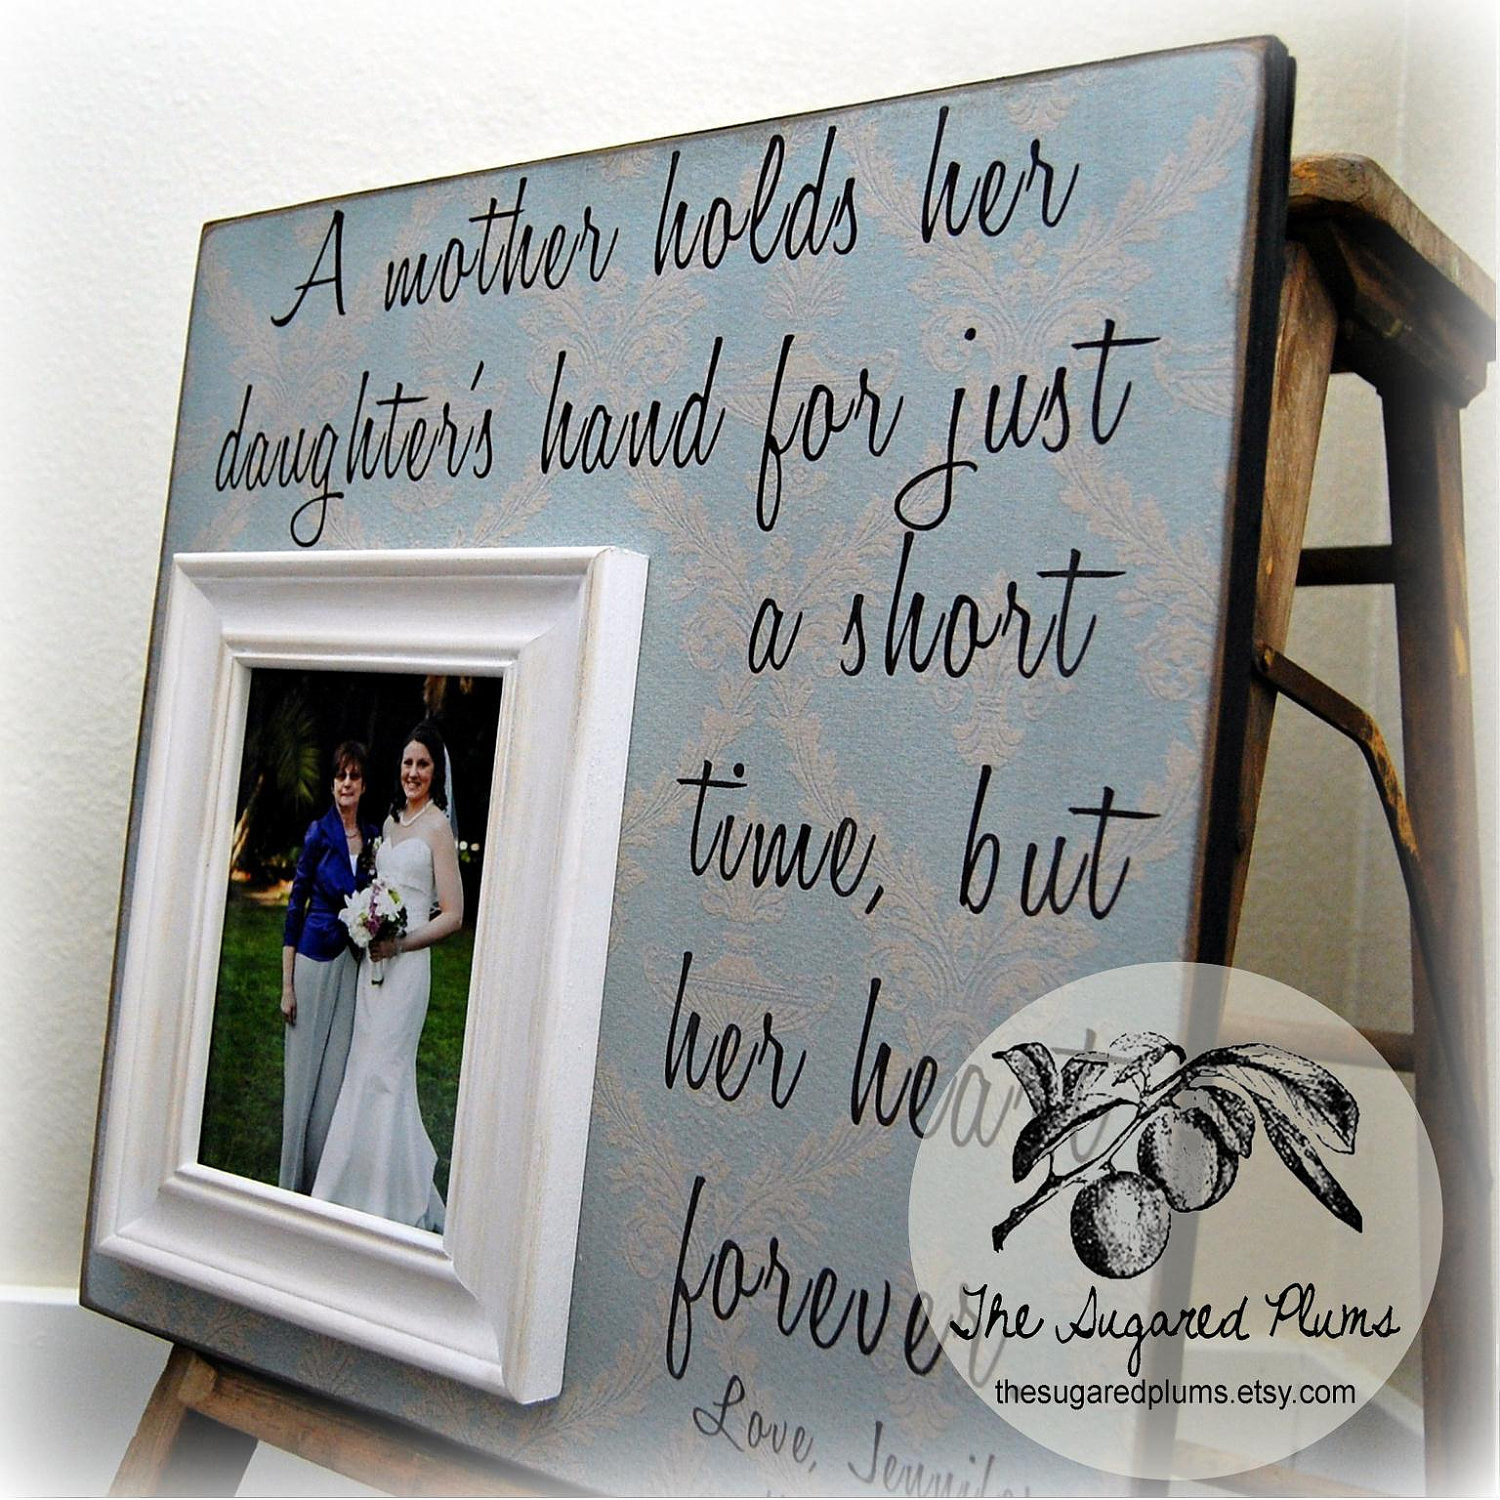 Mother Of The Bride Quotes
 The Mother Bride Quotes QuotesGram